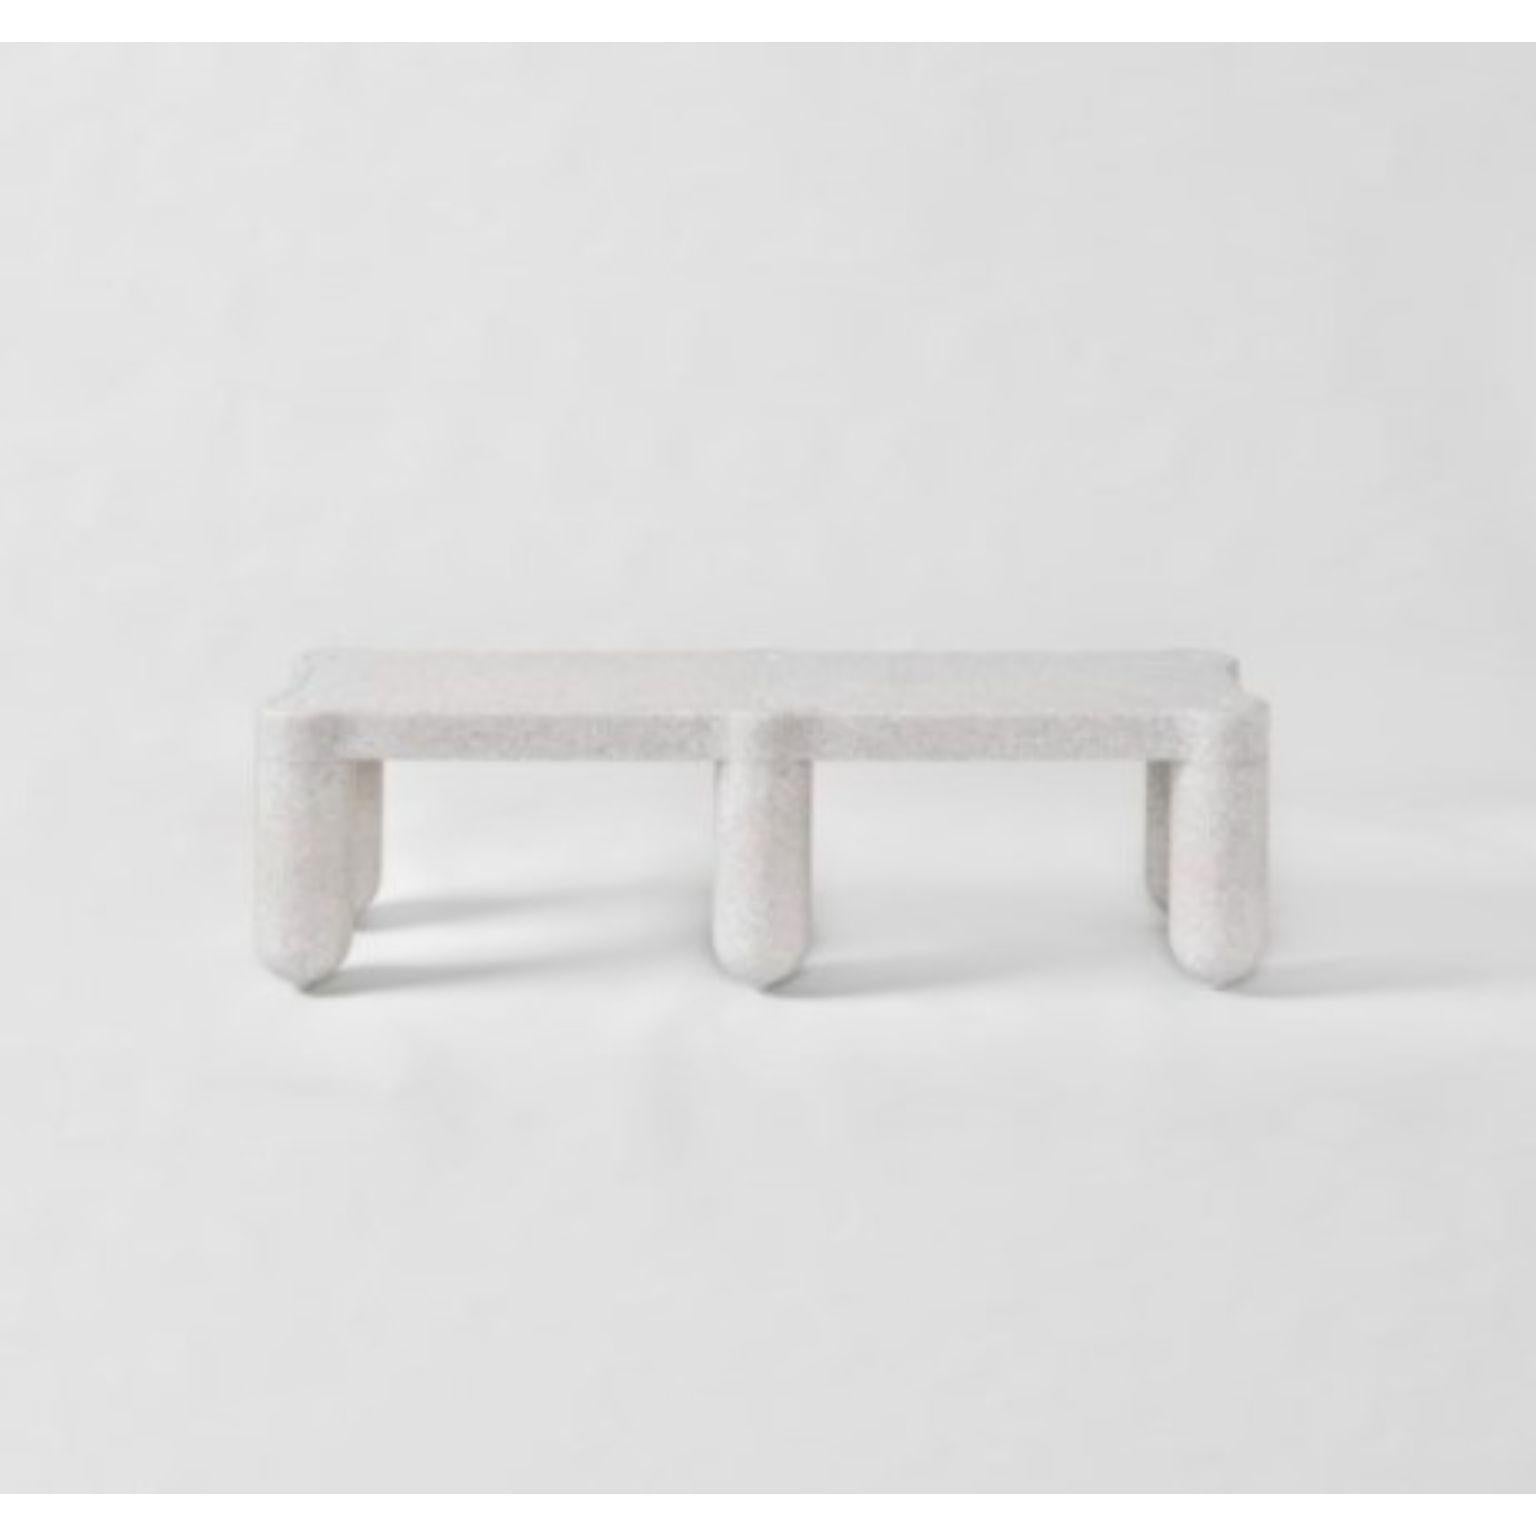 White bench by Supernovas
Dimensions: D150 x W40 x H12 cm
Materials: 100% Recycled LDPE 
Weight: 22 kg
Also available in different colours.

Easy to assemble without tools, Afterlife Bench takes the weight off your feet or becomes the perfect